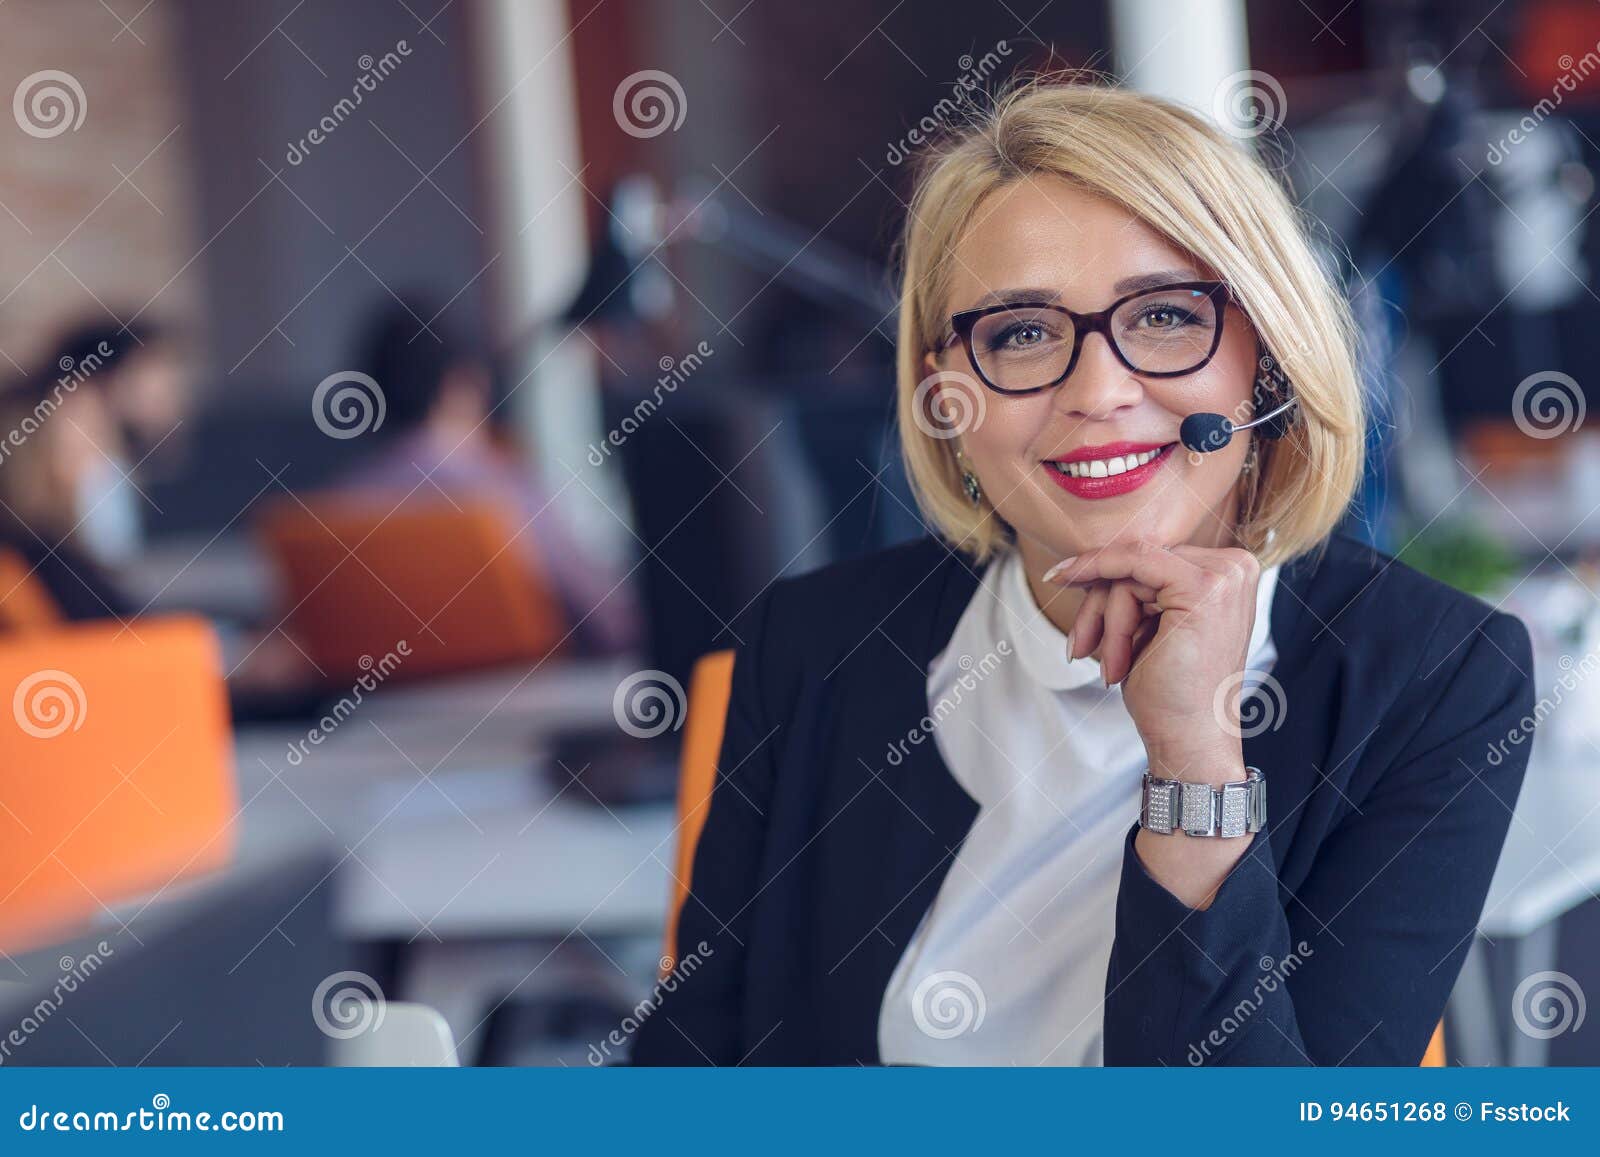 customer service representative at work. beautiful young woman in headset working at the computer